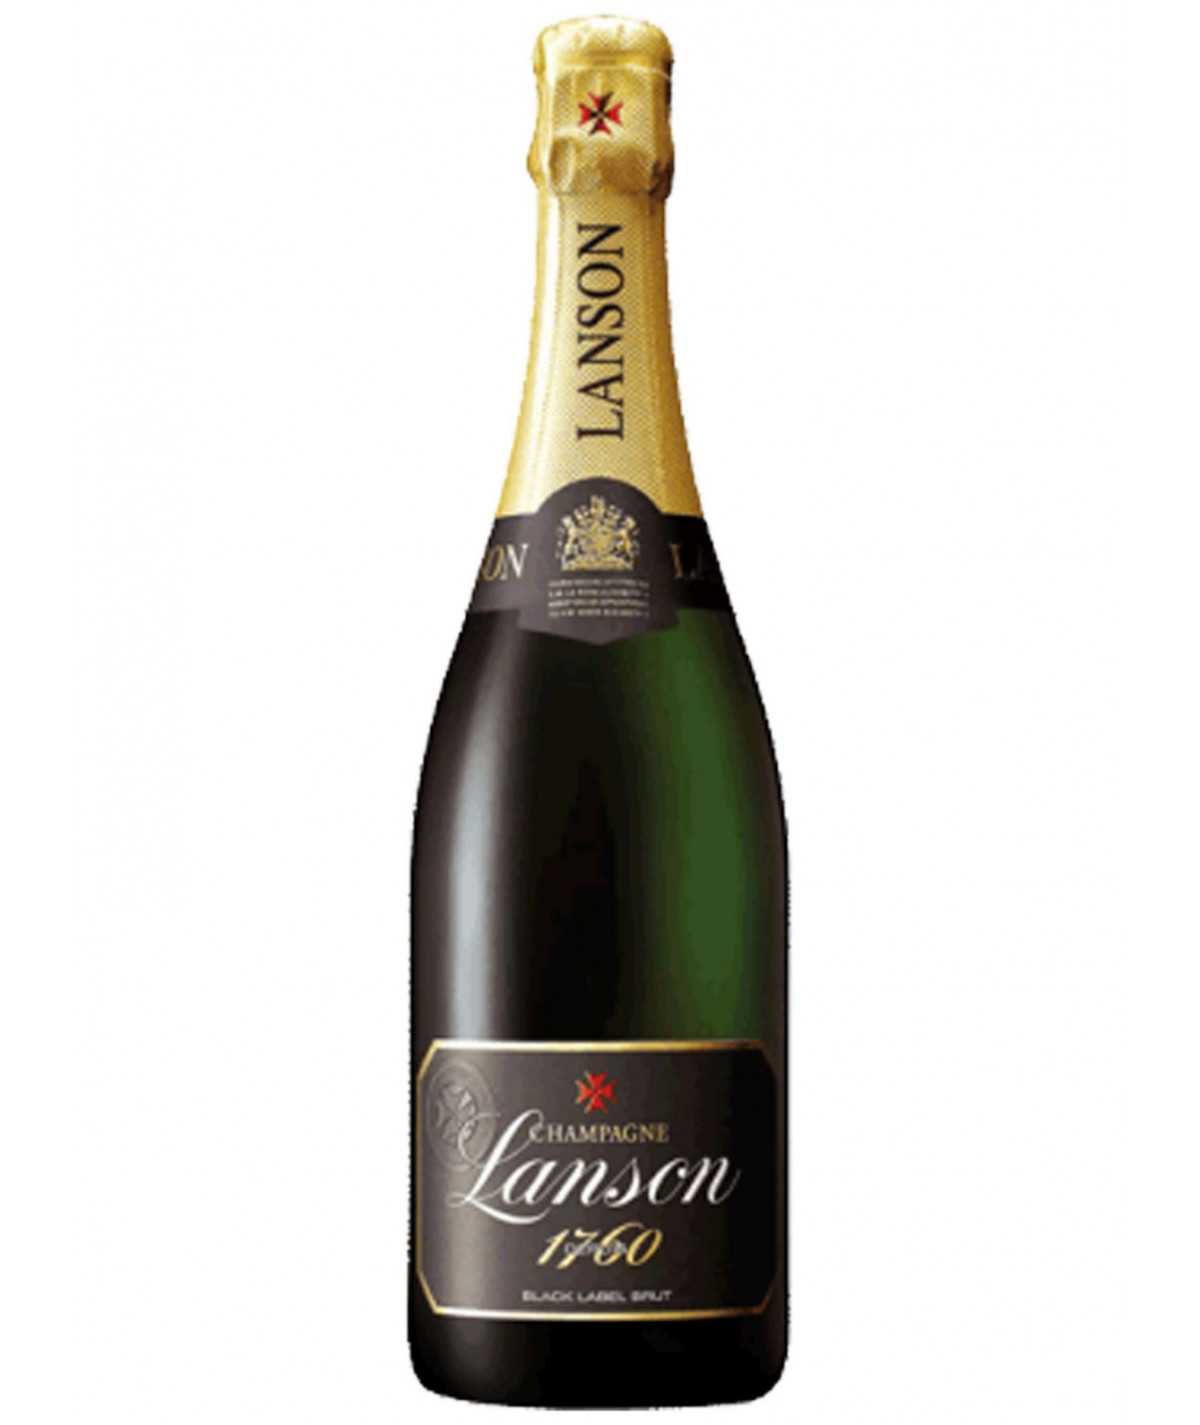 Champagne Lanson Black Label Brut - A masterpiece of elegance and heritage for champagne lovers